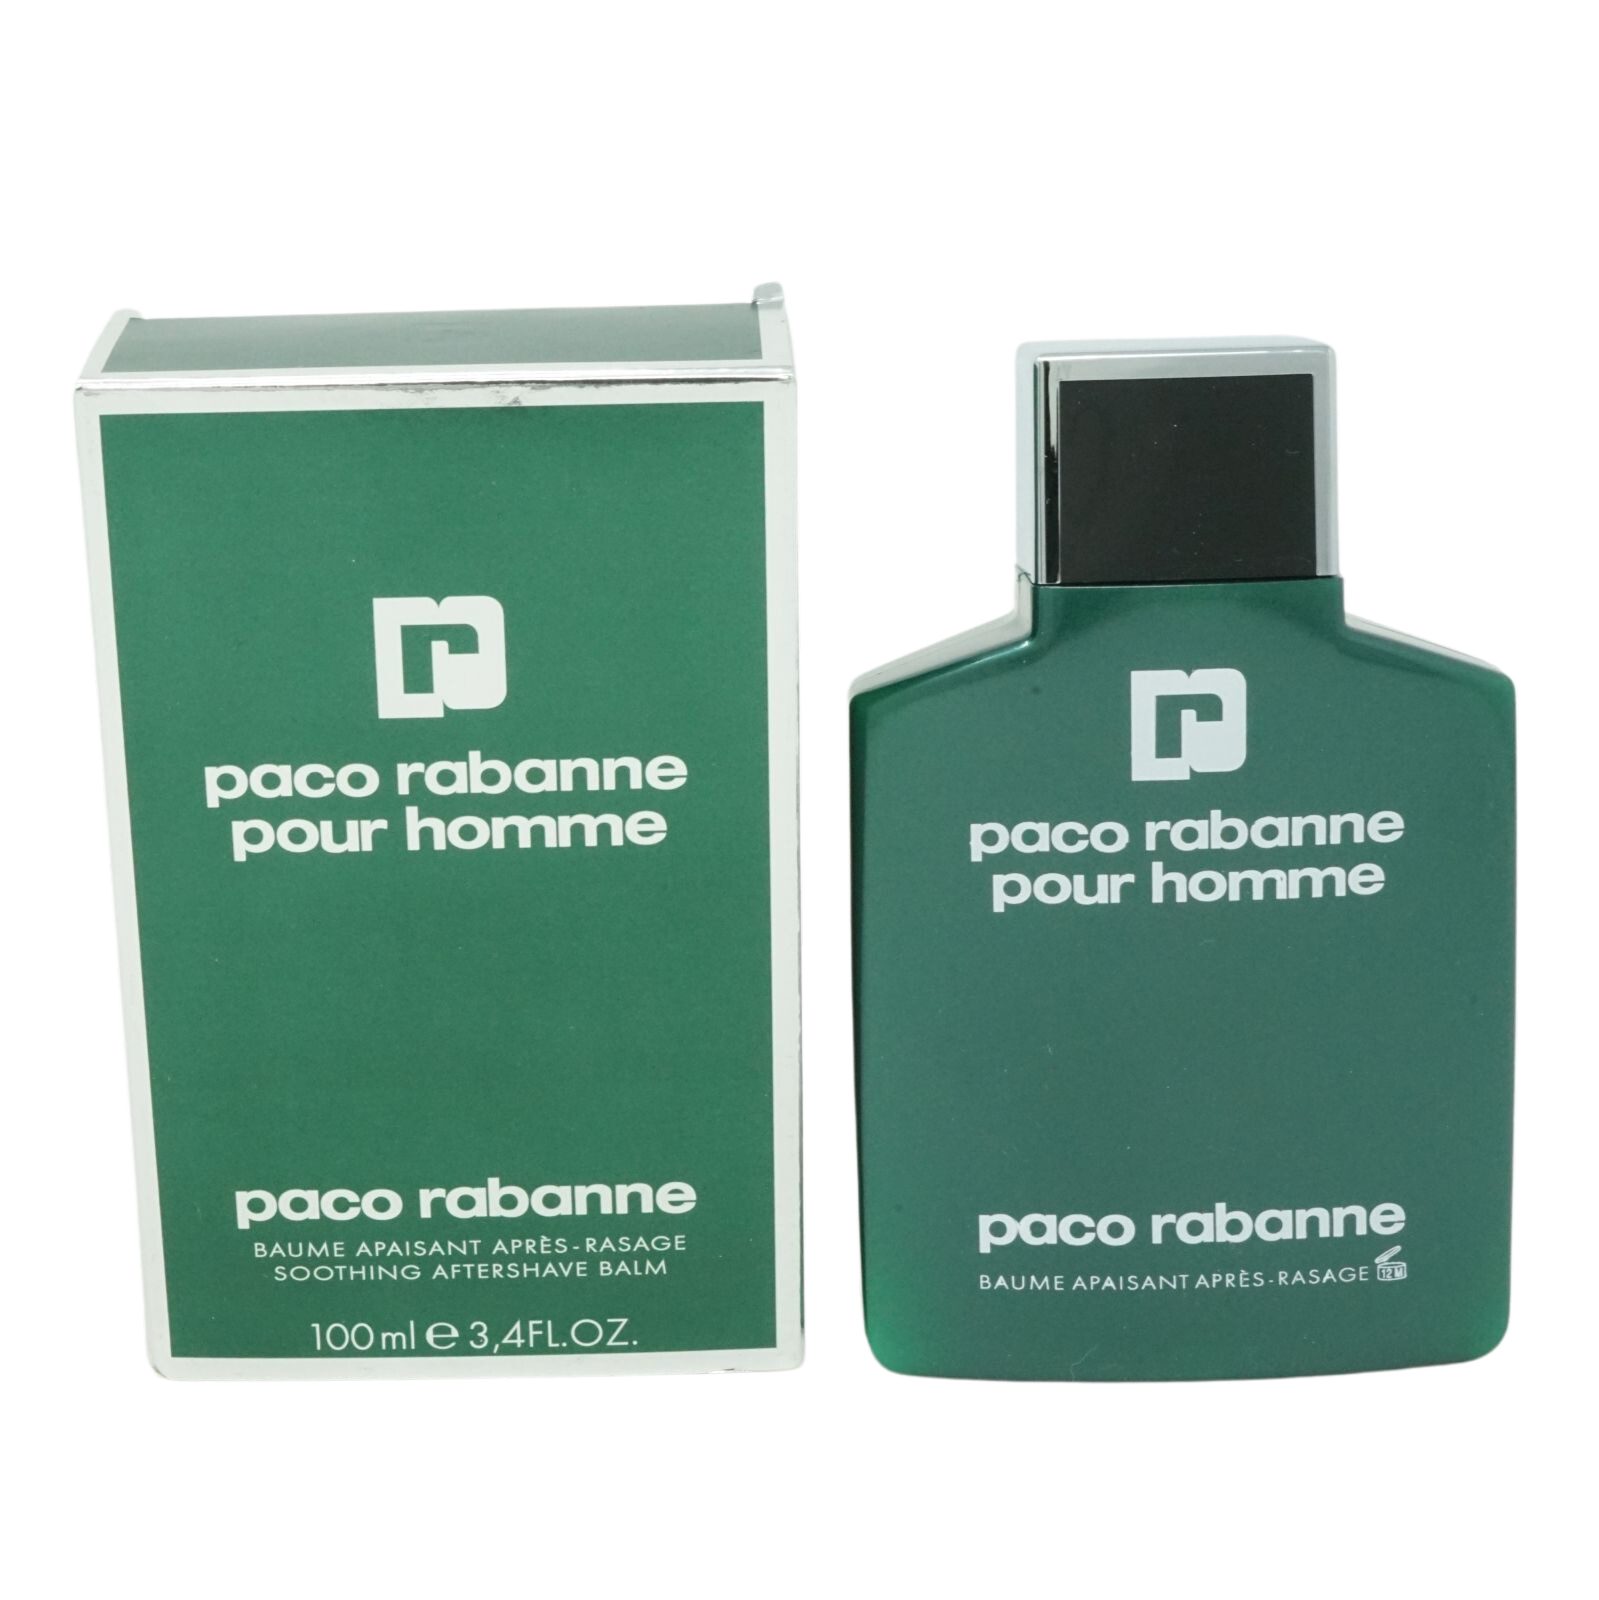 paco rabanne After-Shave Balsam Paco Rabanne Pour Homme Soothing After shave Balm 100ml